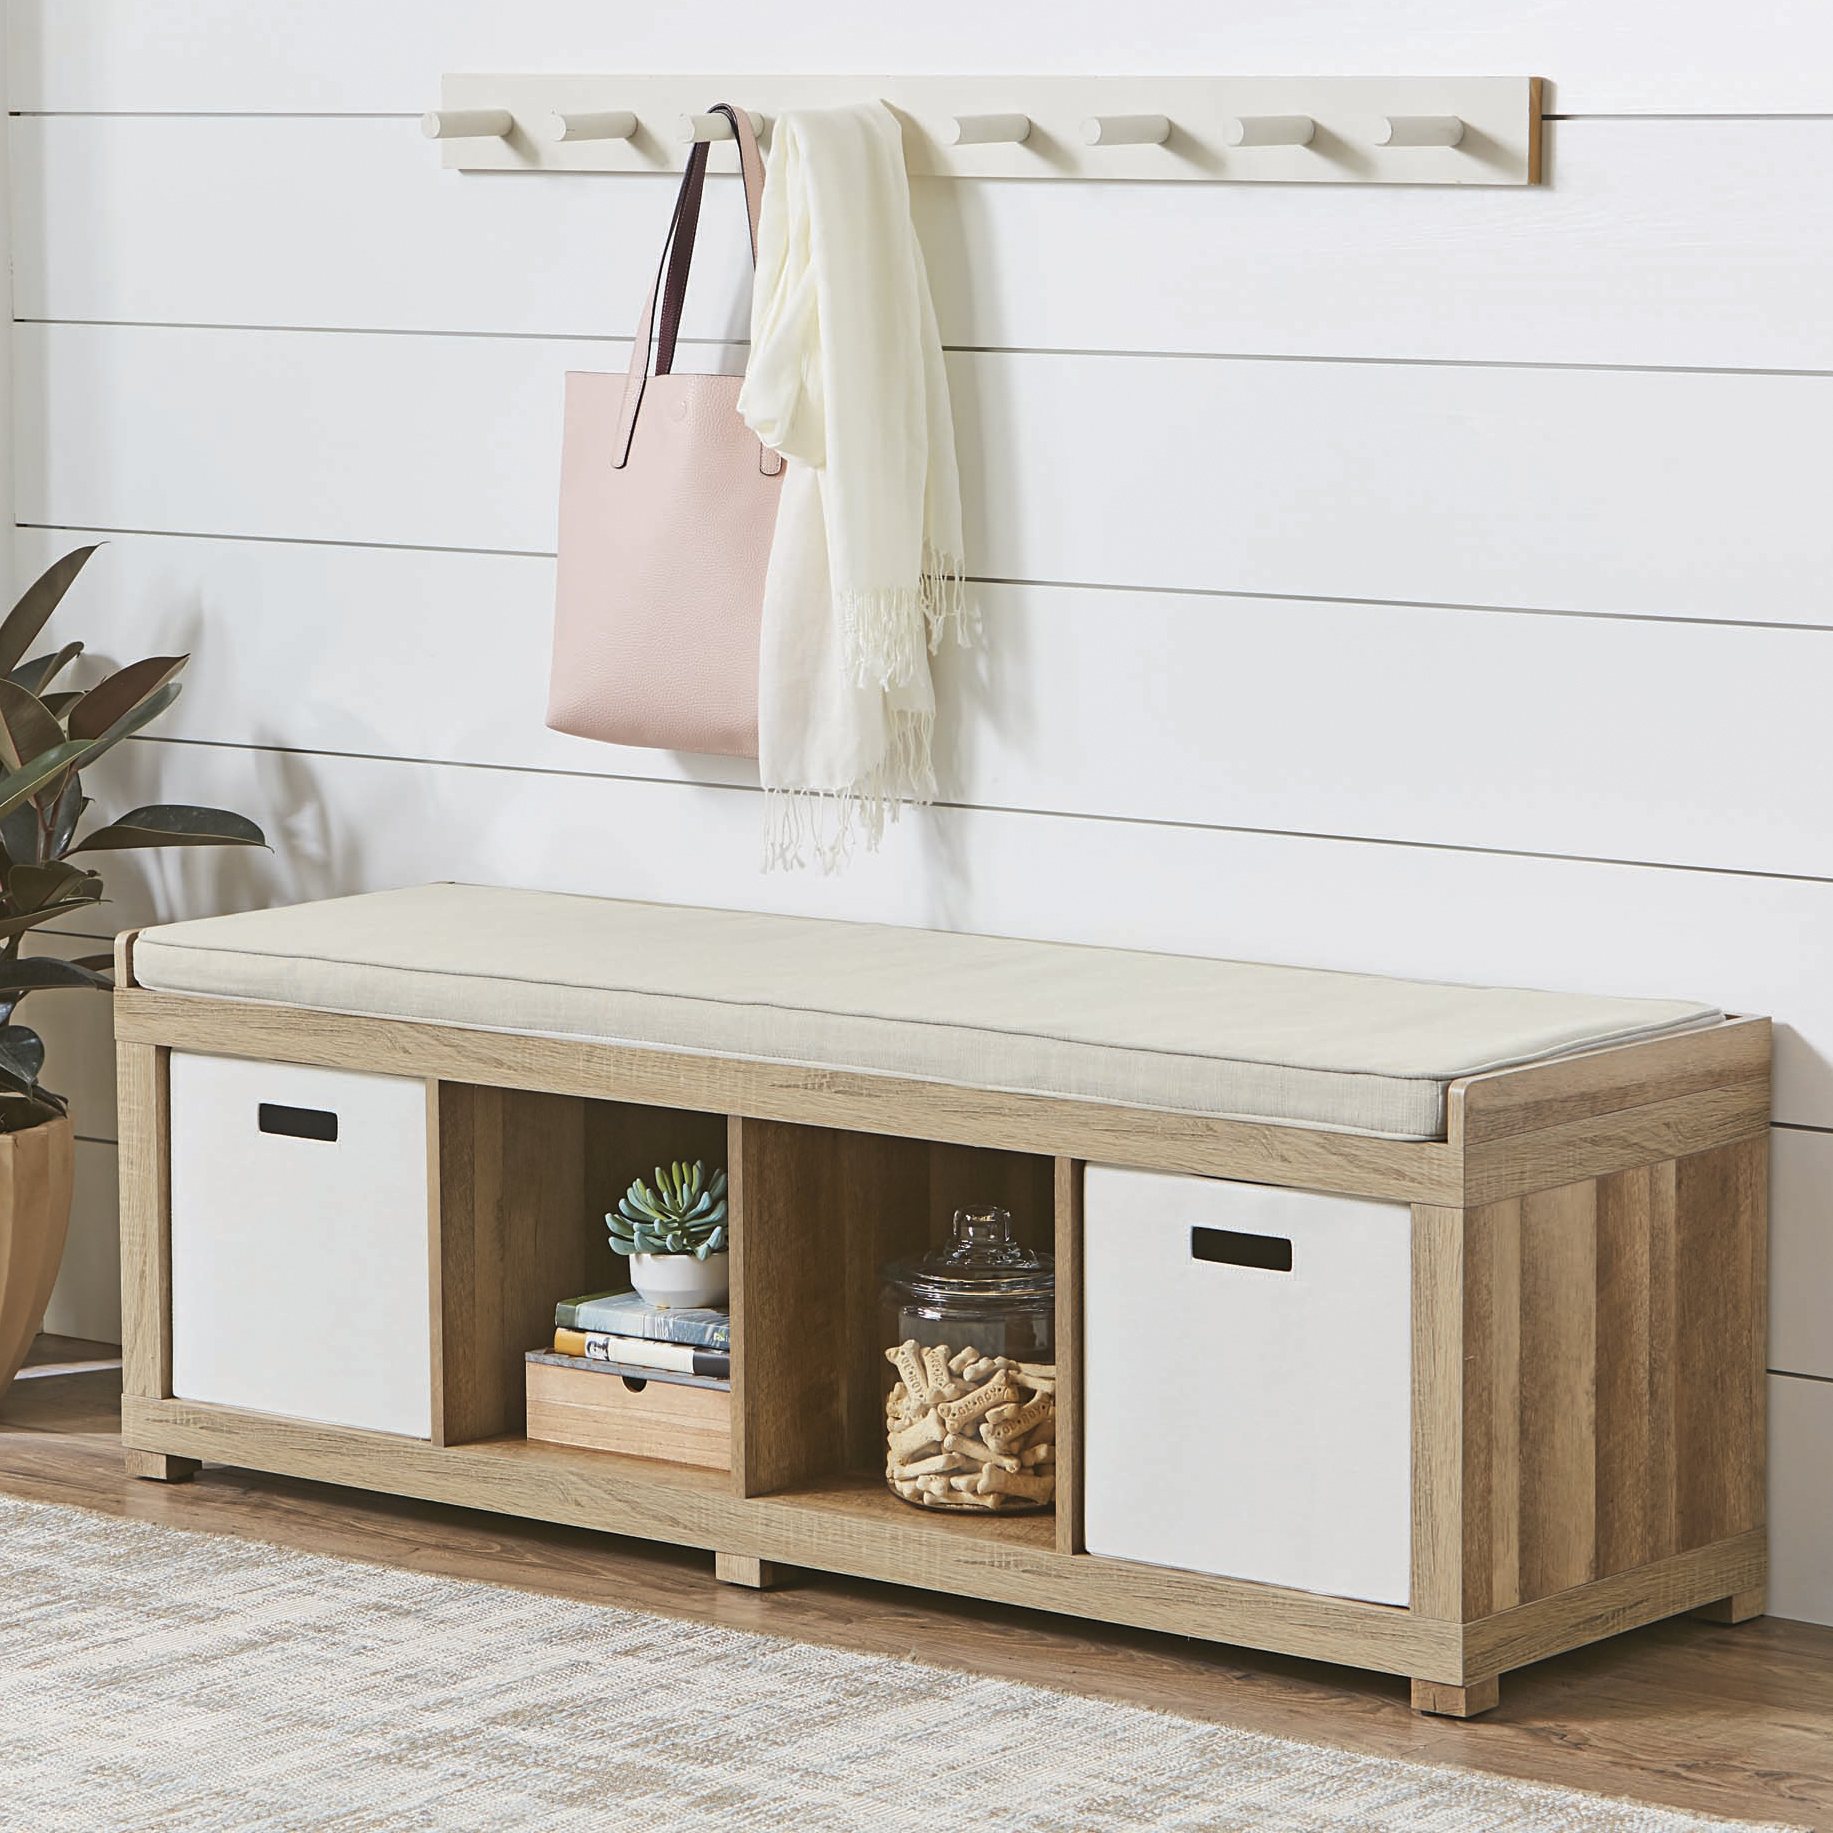 Better Homes & Gardens 4-Cube Shoe Storage Bench, Weathered - image 1 of 7